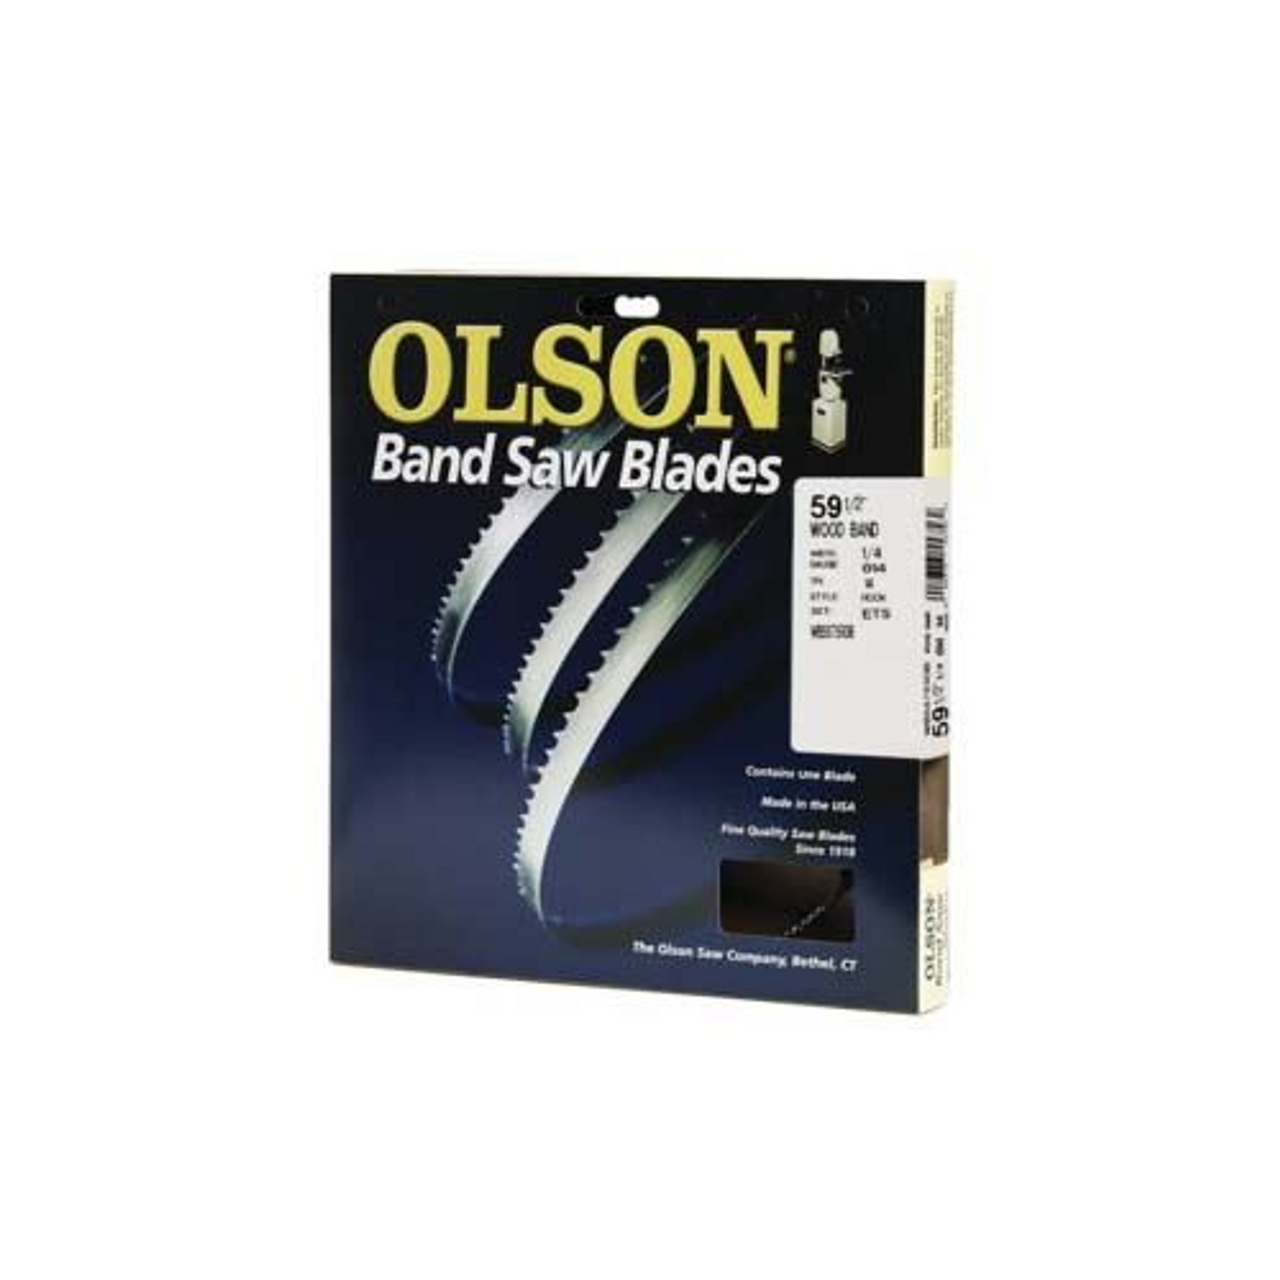 Olson 344-7133 Saw Band Blade, 1/4 in W, 59-1/2 in L, 14 TPI